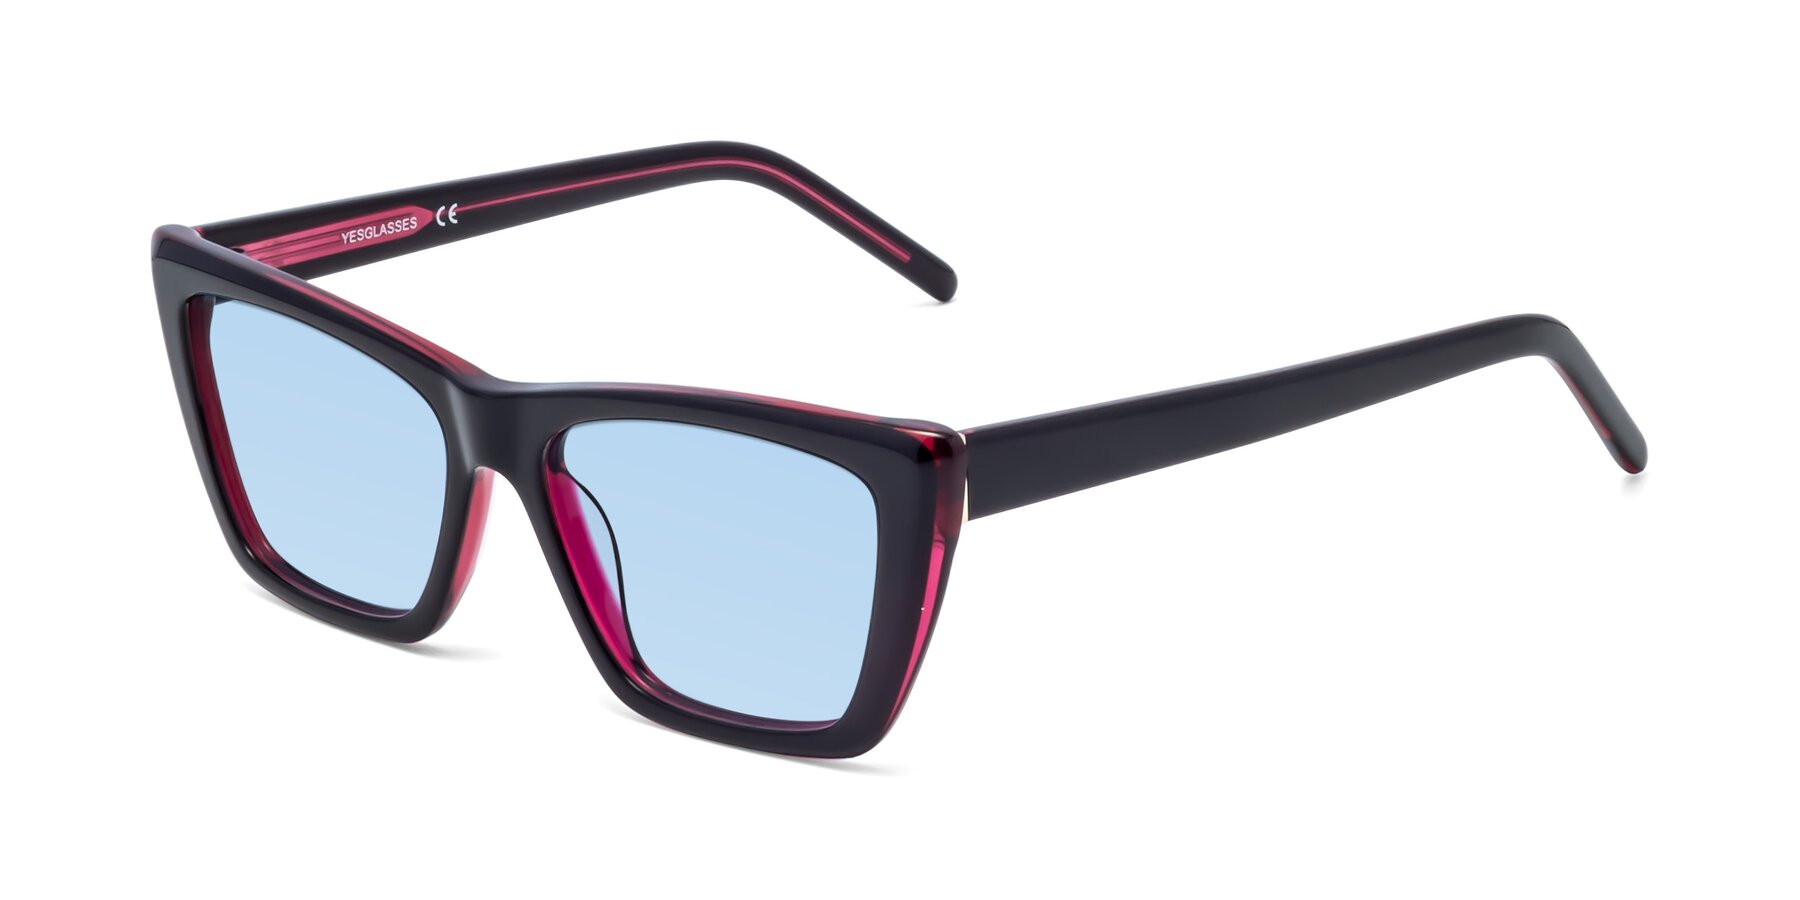 Angle of 1494 in Black-Wine with Light Blue Tinted Lenses